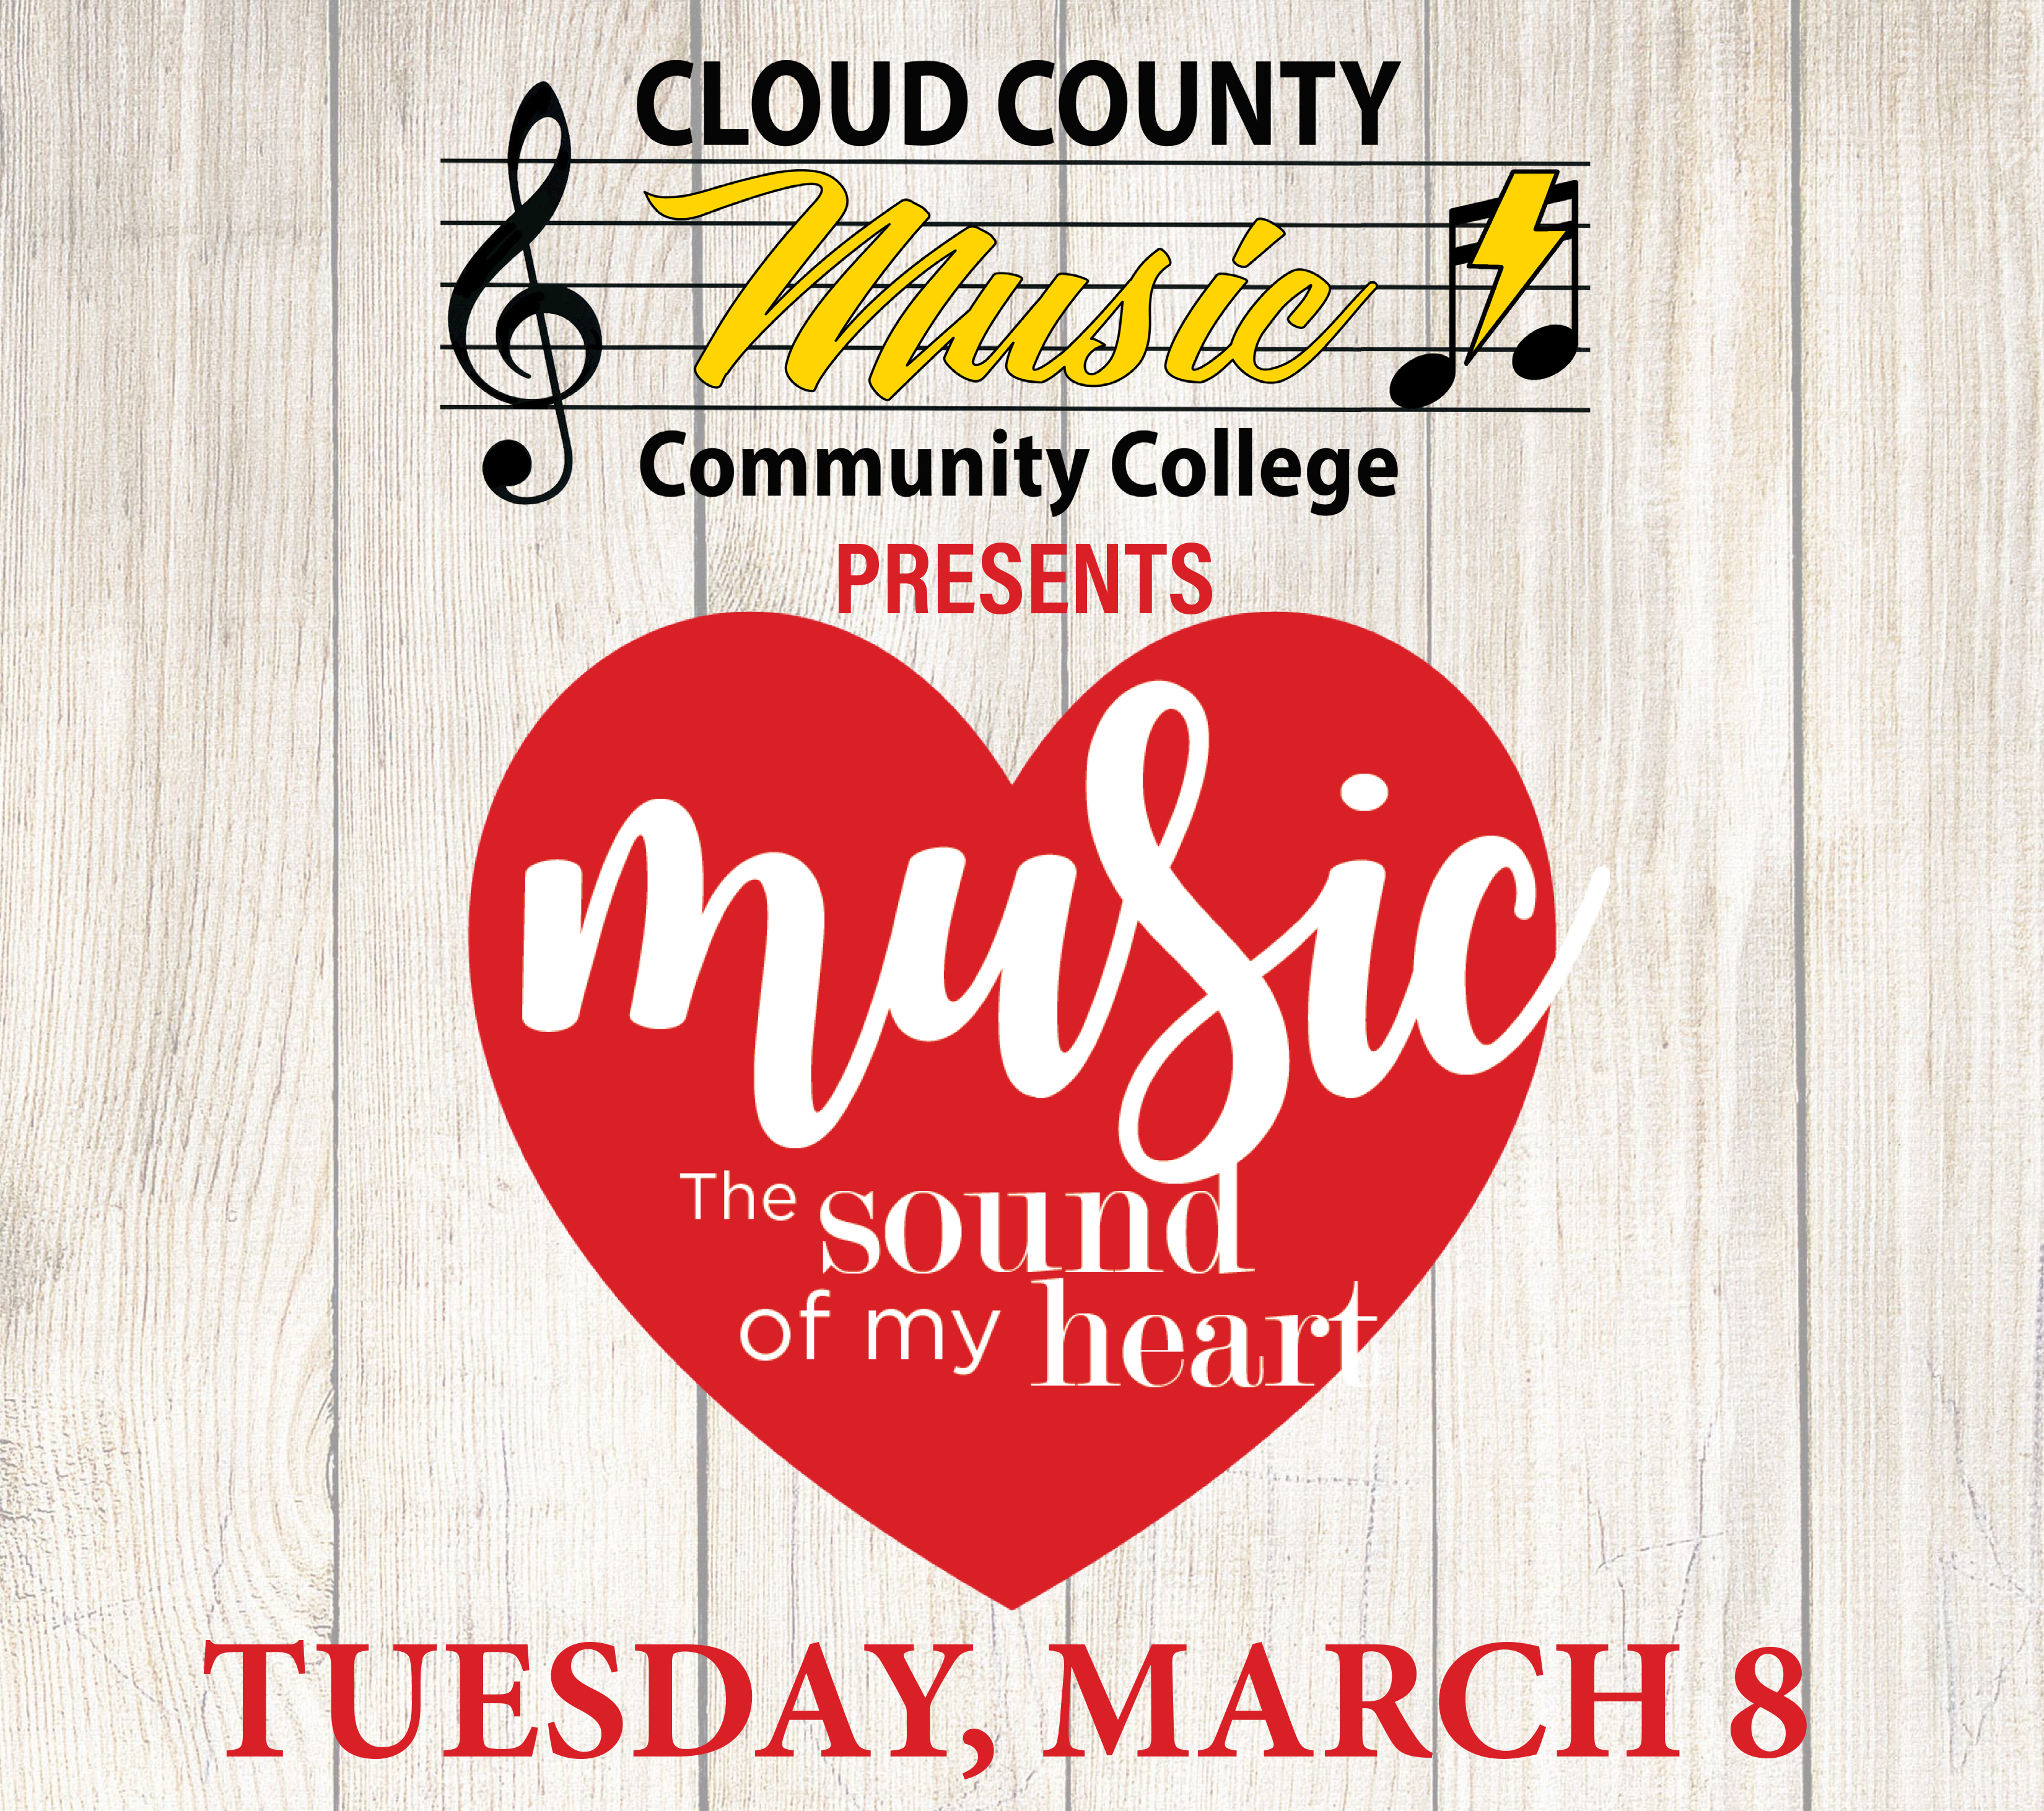 The Spring 2022 Music Concert is March 8.